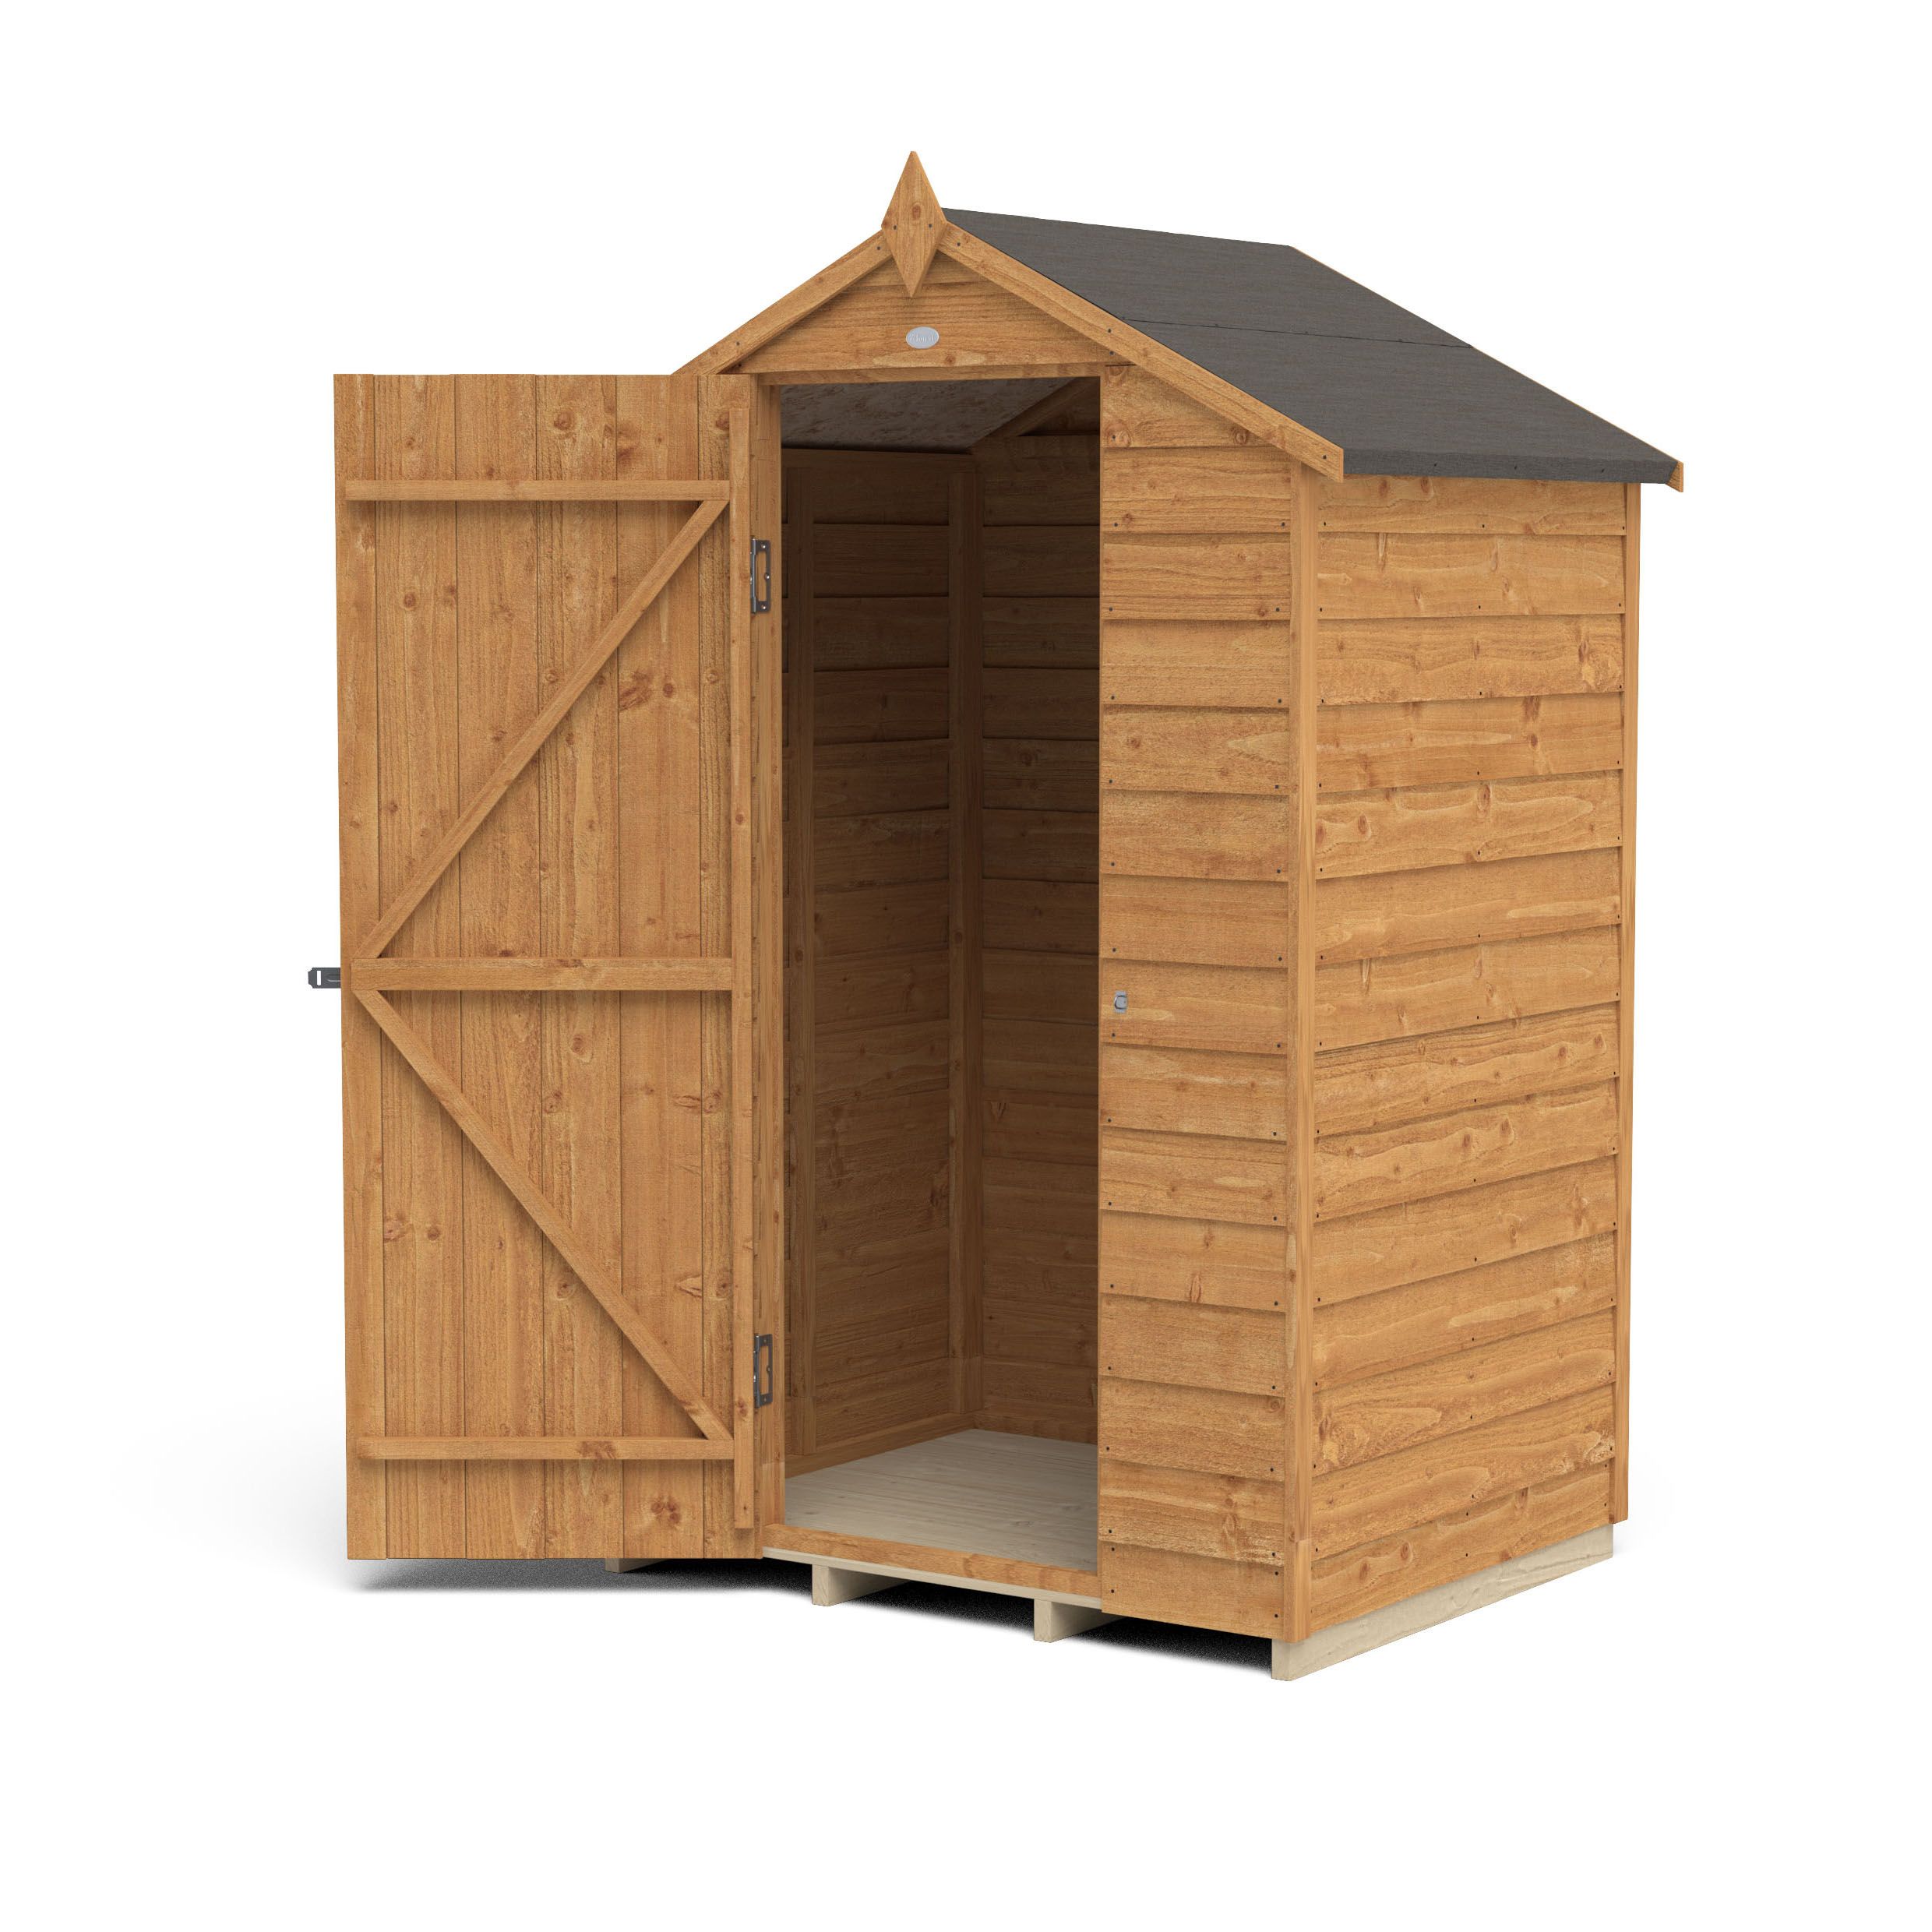 Forest Garden Overlap 4x3 ft Apex Wooden Dip treated Shed with floor (Base included) - Assembly service included